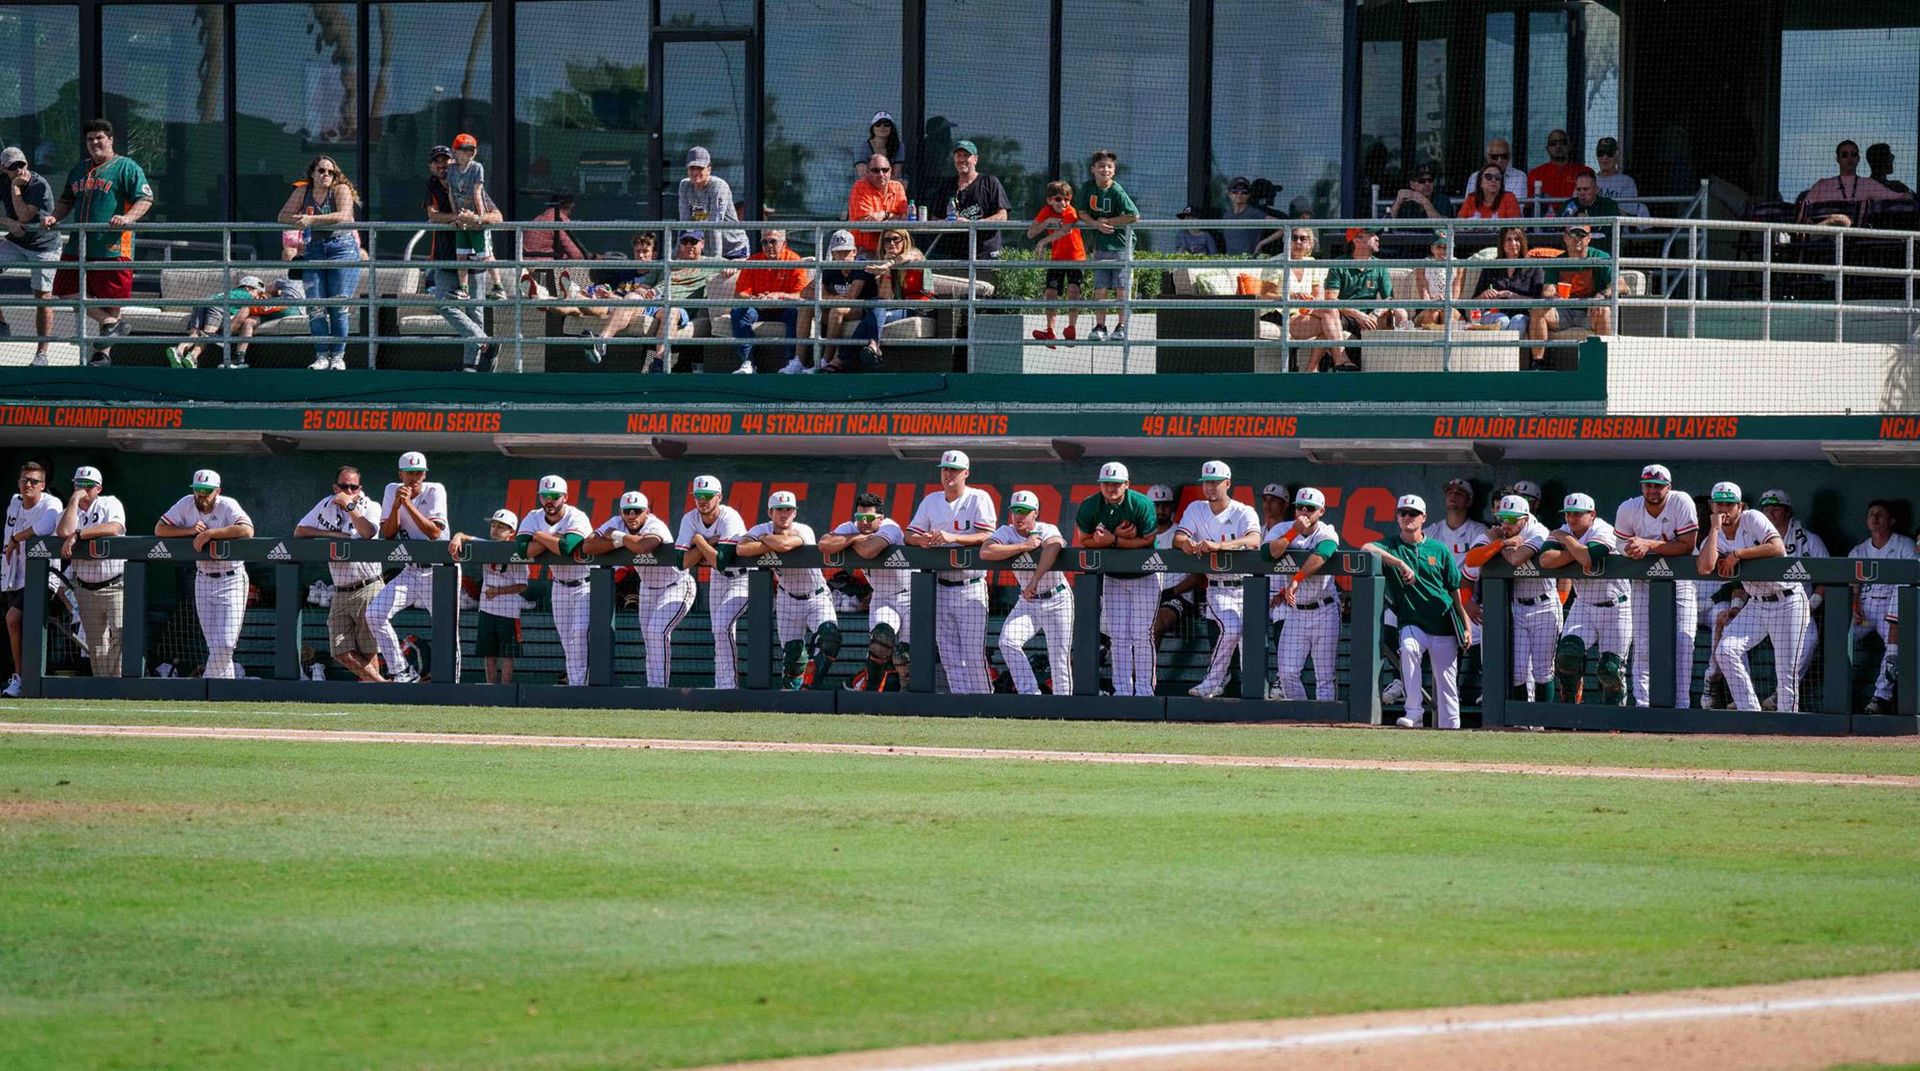 Canes Fall to Gators in Series Finale